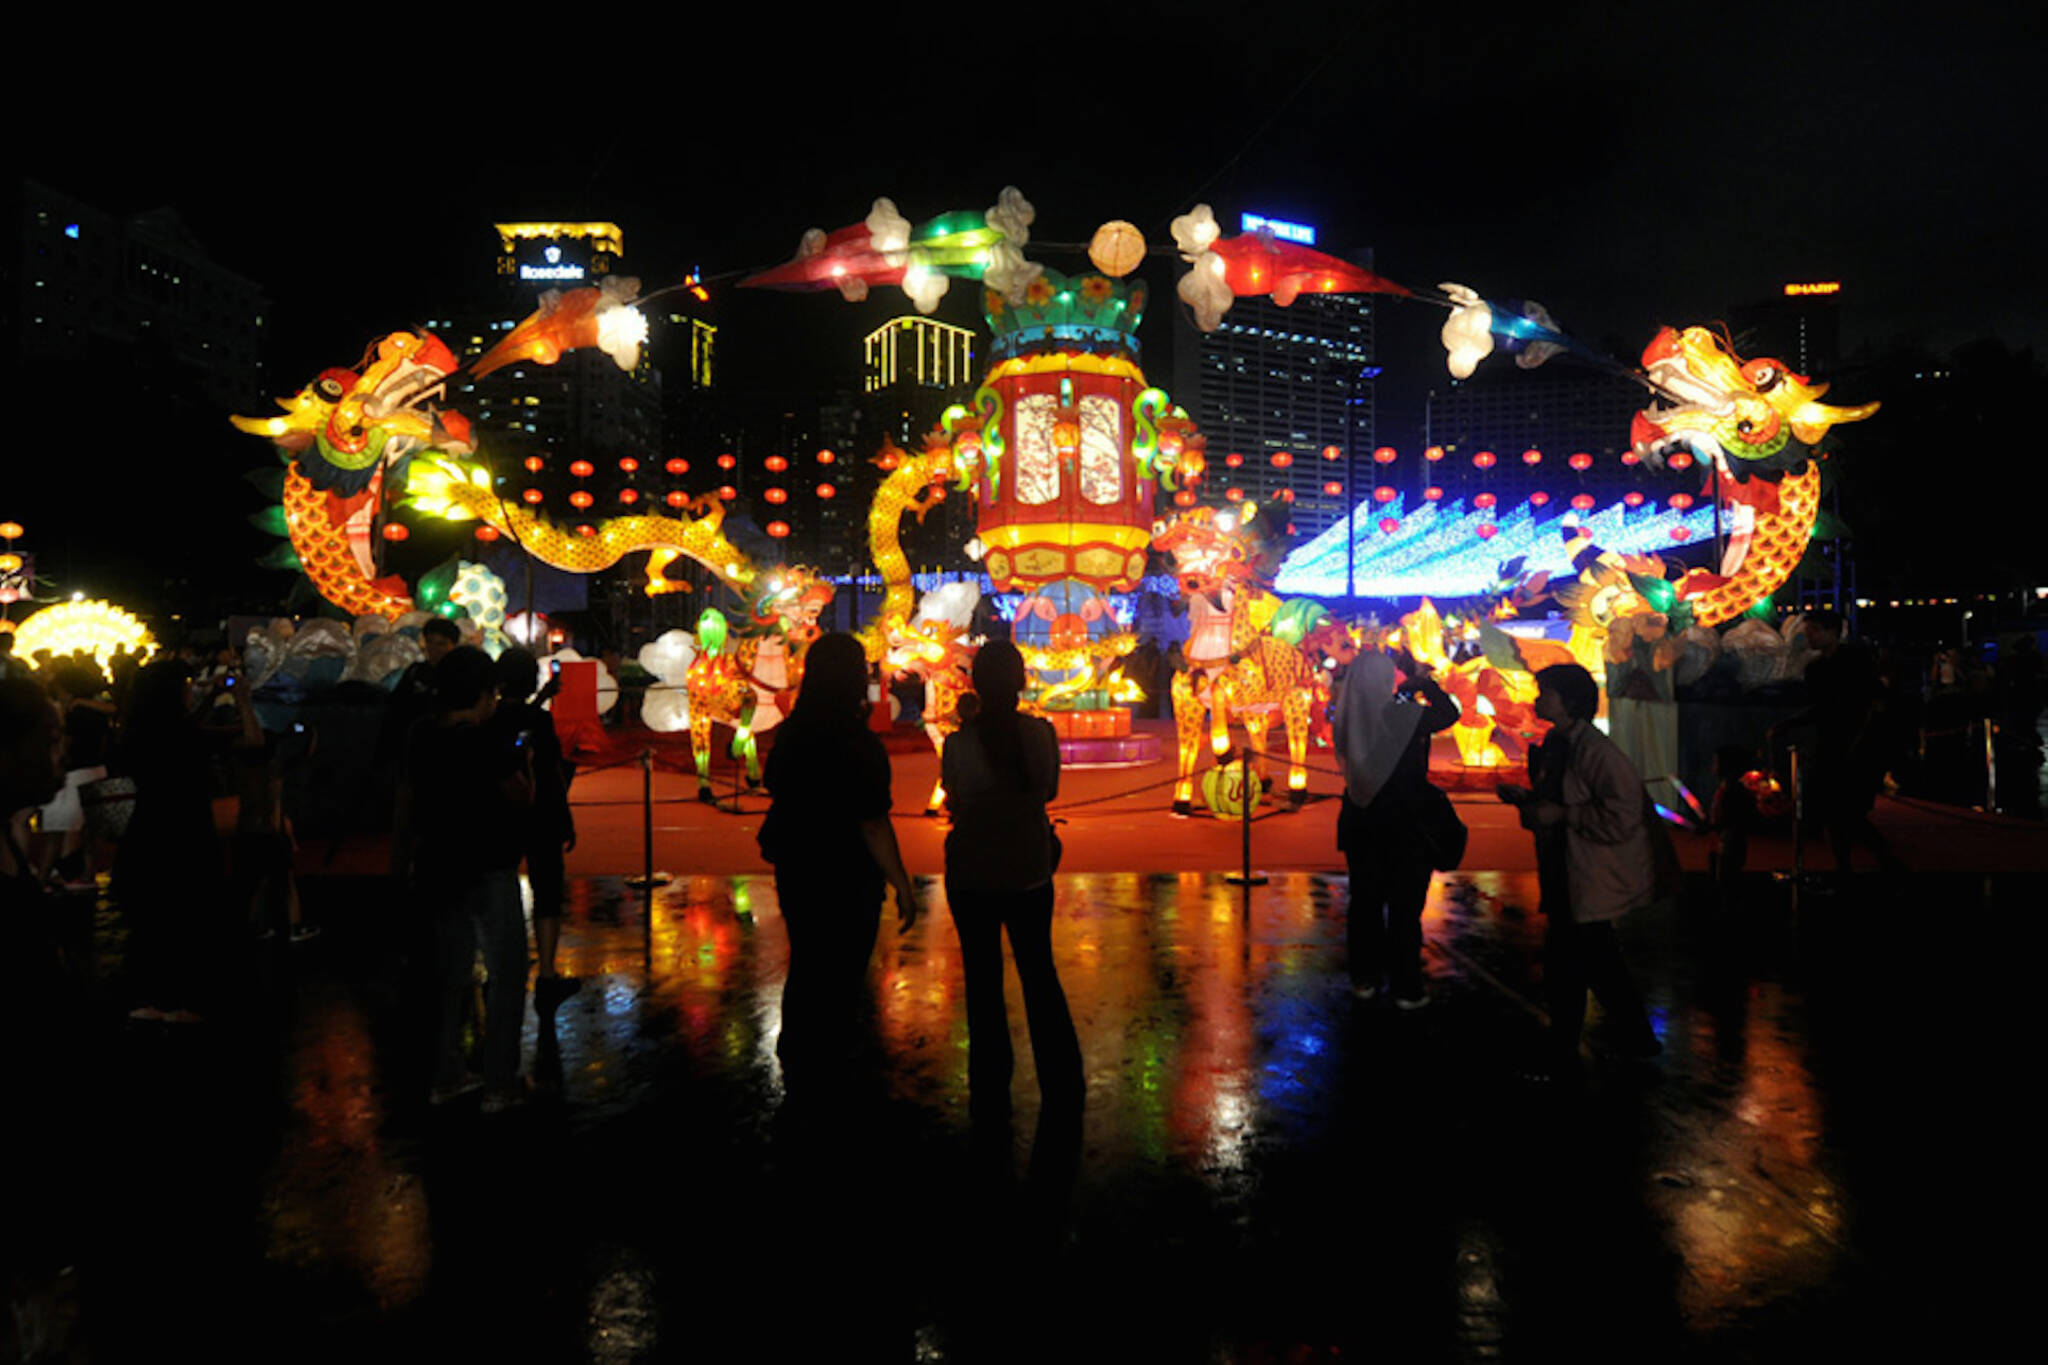 World's largest indoor lantern festival coming to Toronto